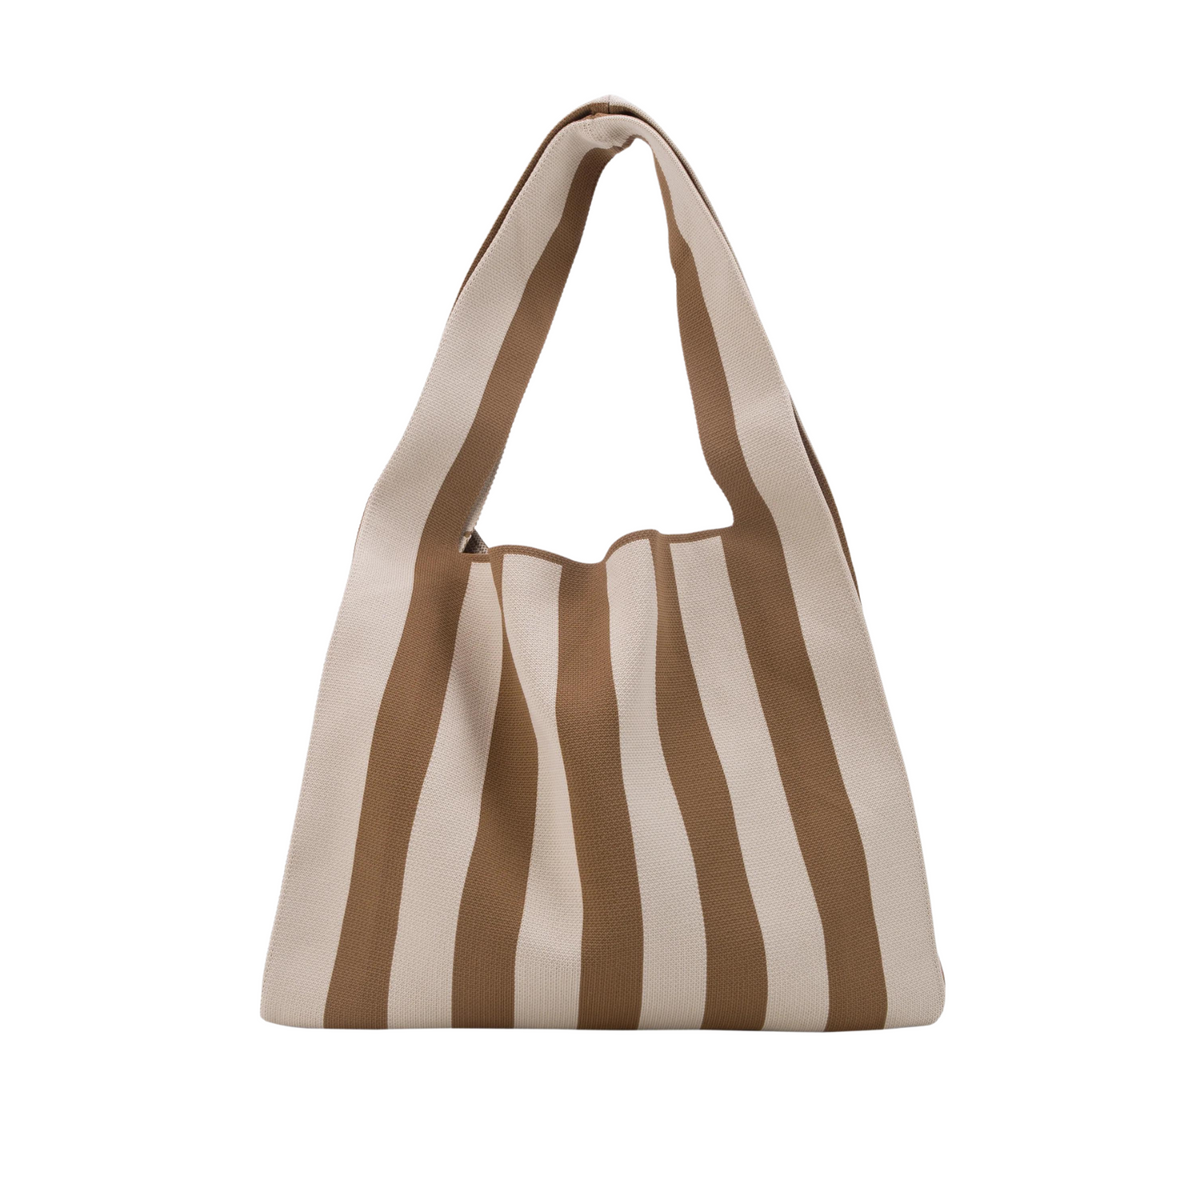 CARRY KNIT BAG - BROWN NUDE